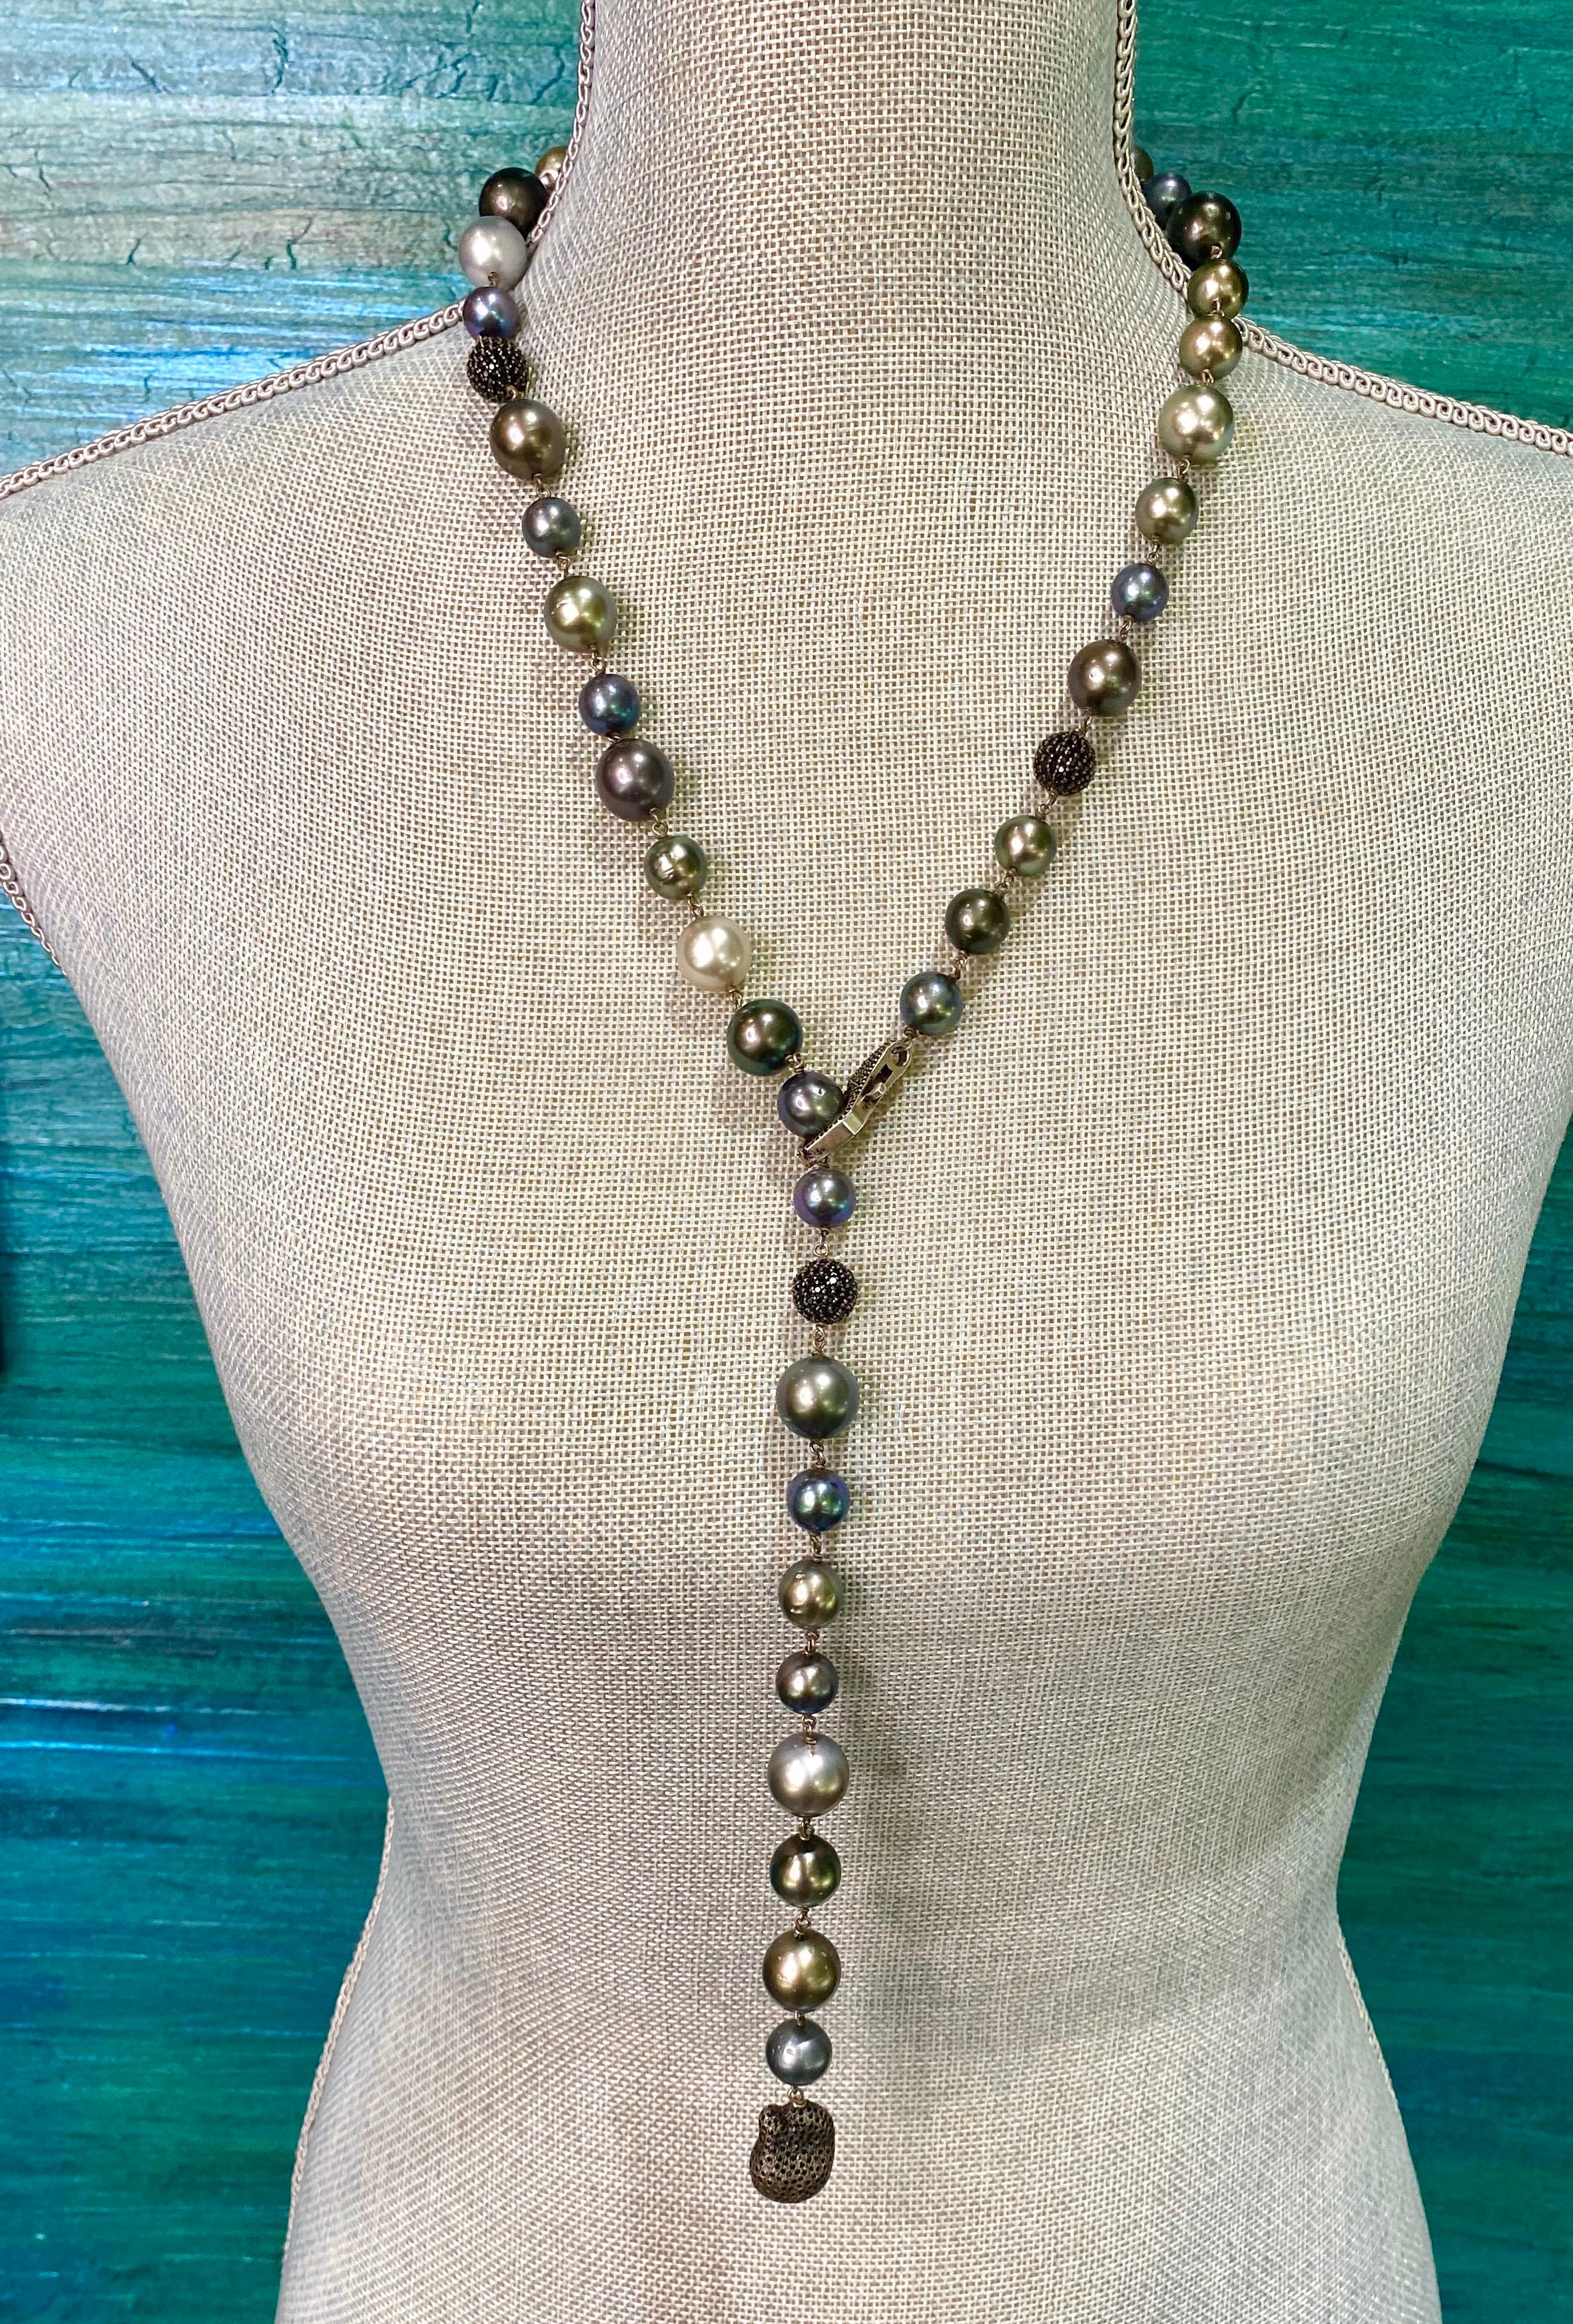 A modern take on classic Tahitian pearls!  These stunning, naturally colored Tahitian pearls are mostly round and feature almost every color that is available in Tahitian pearls.  They are 10-14mm in size and feature sparkling black spinel accent